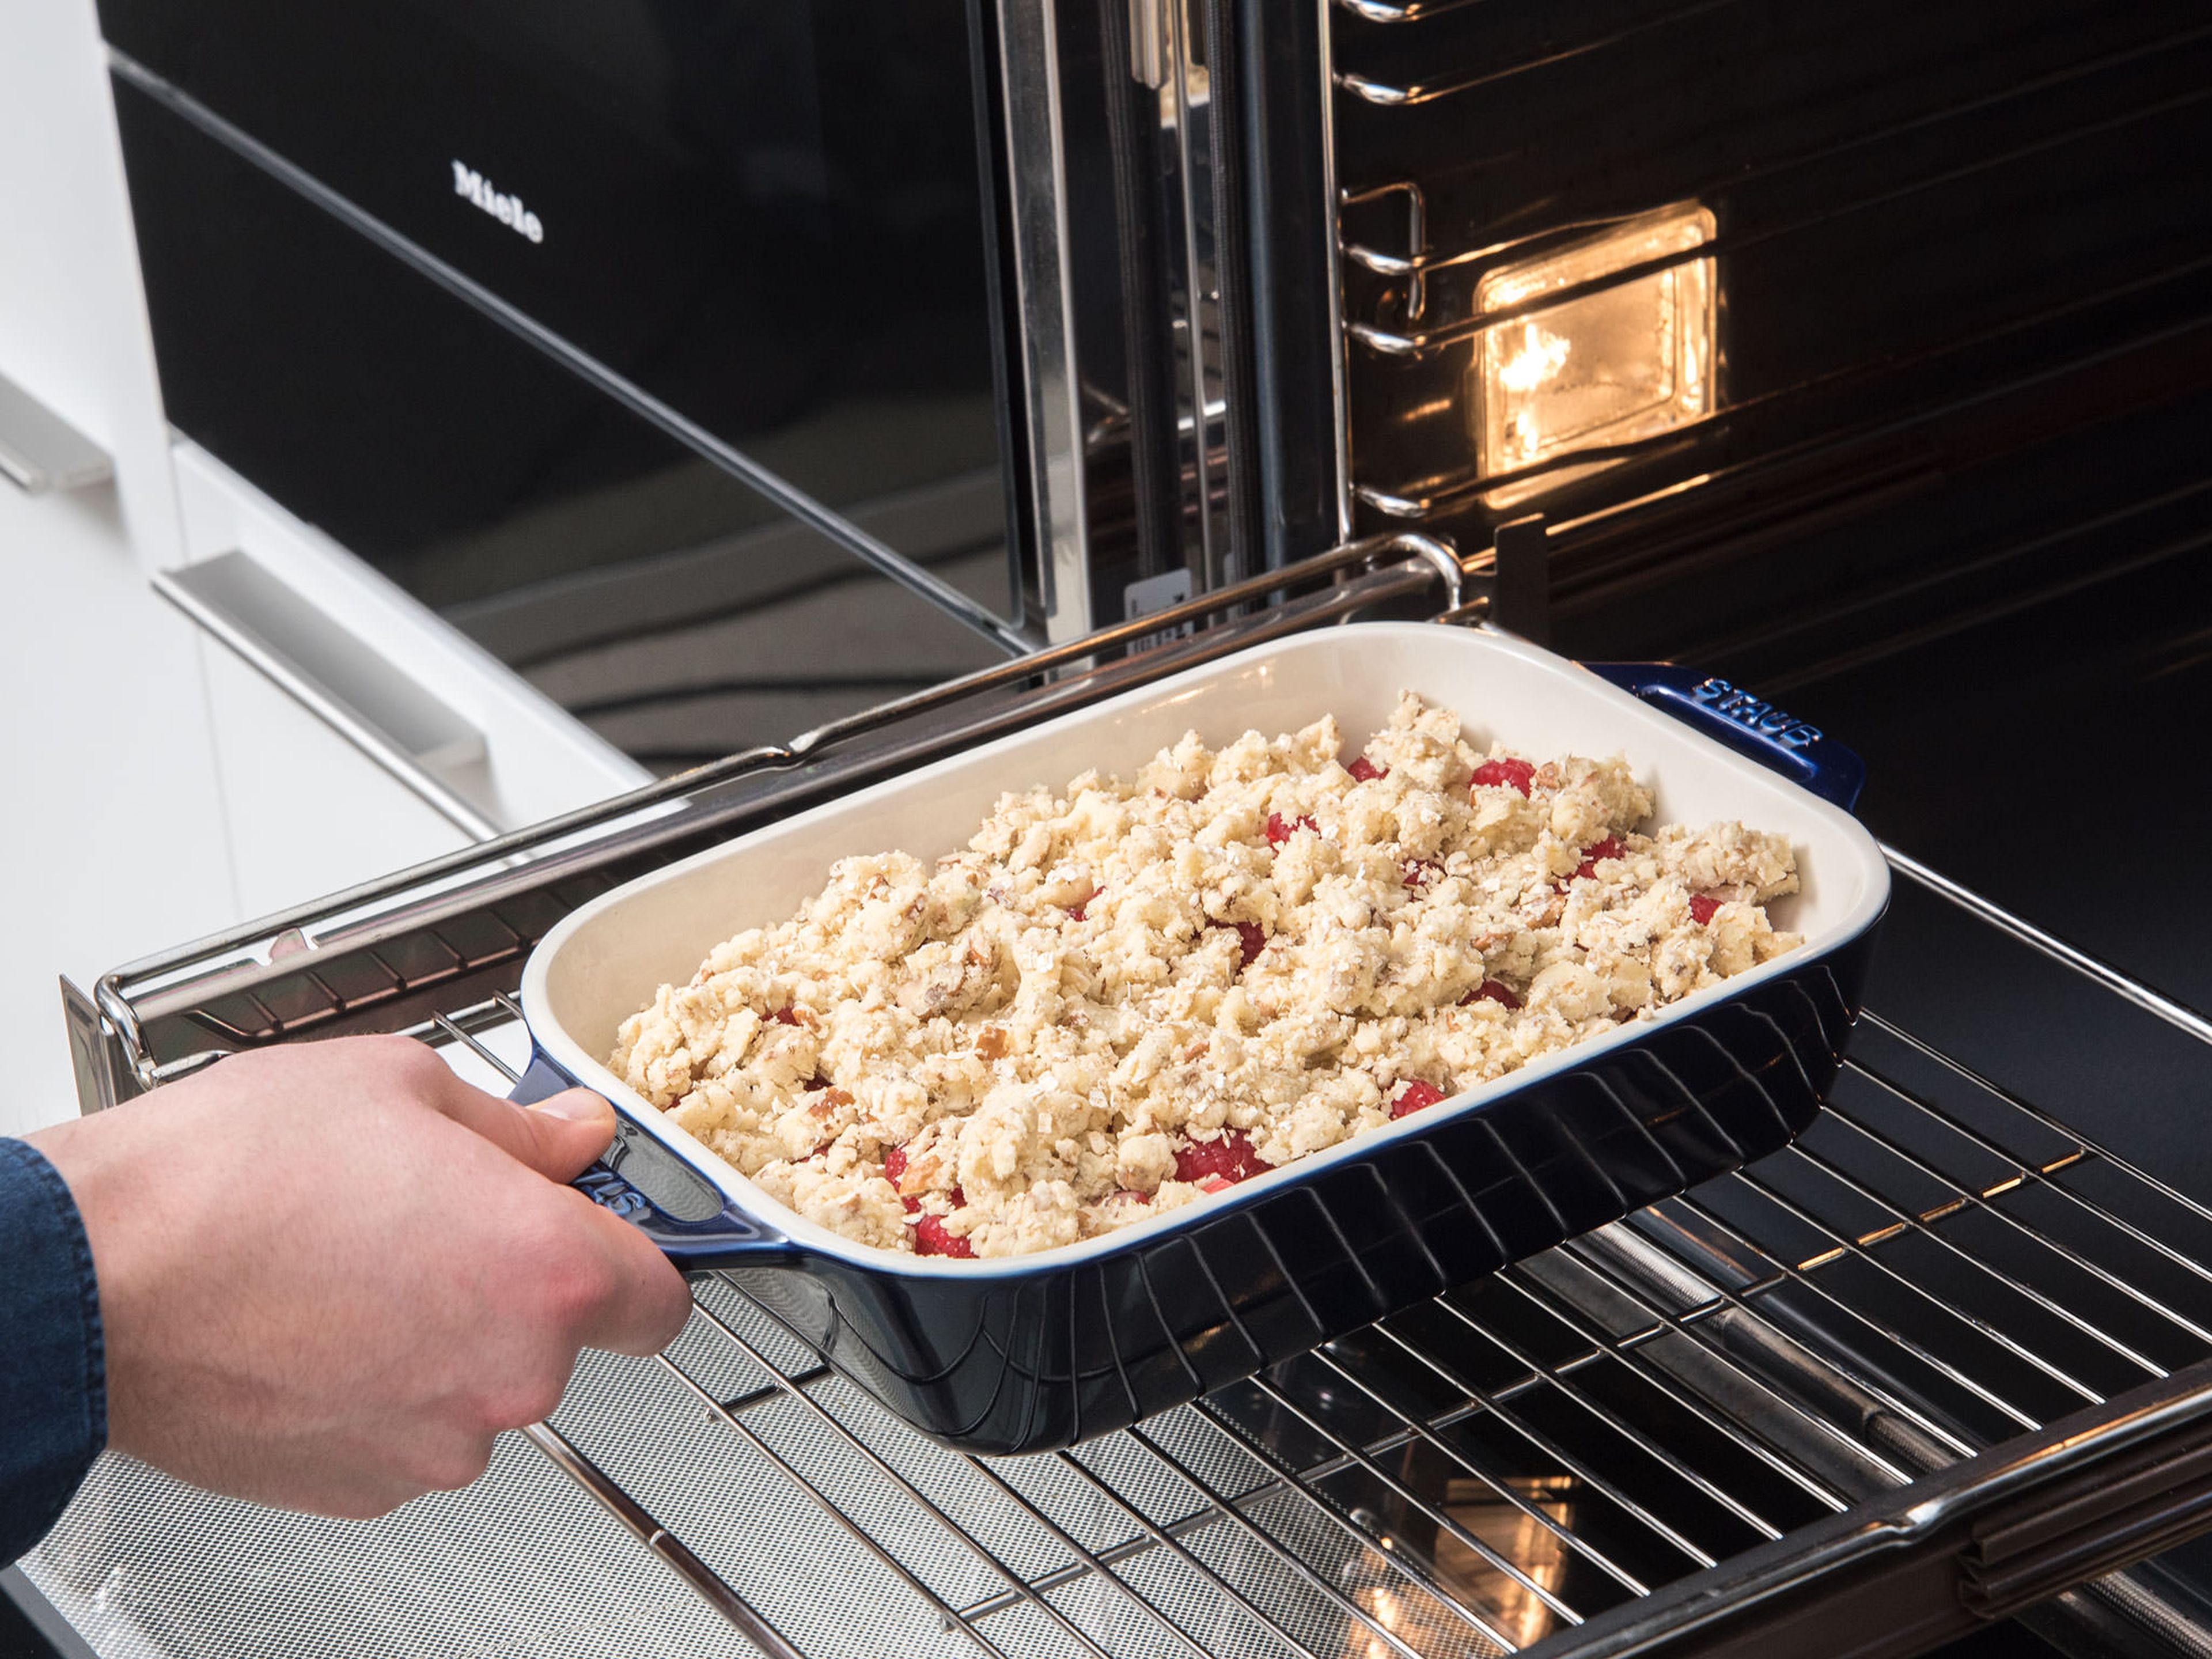 Sprinkle the rhubarb with the crumble and bake in the oven at 190°C/375°C for approx. 45 - 50 min., or until the top is golden brown and the top of the crumbles are crisp. Serve with whipped cream and enjoy!